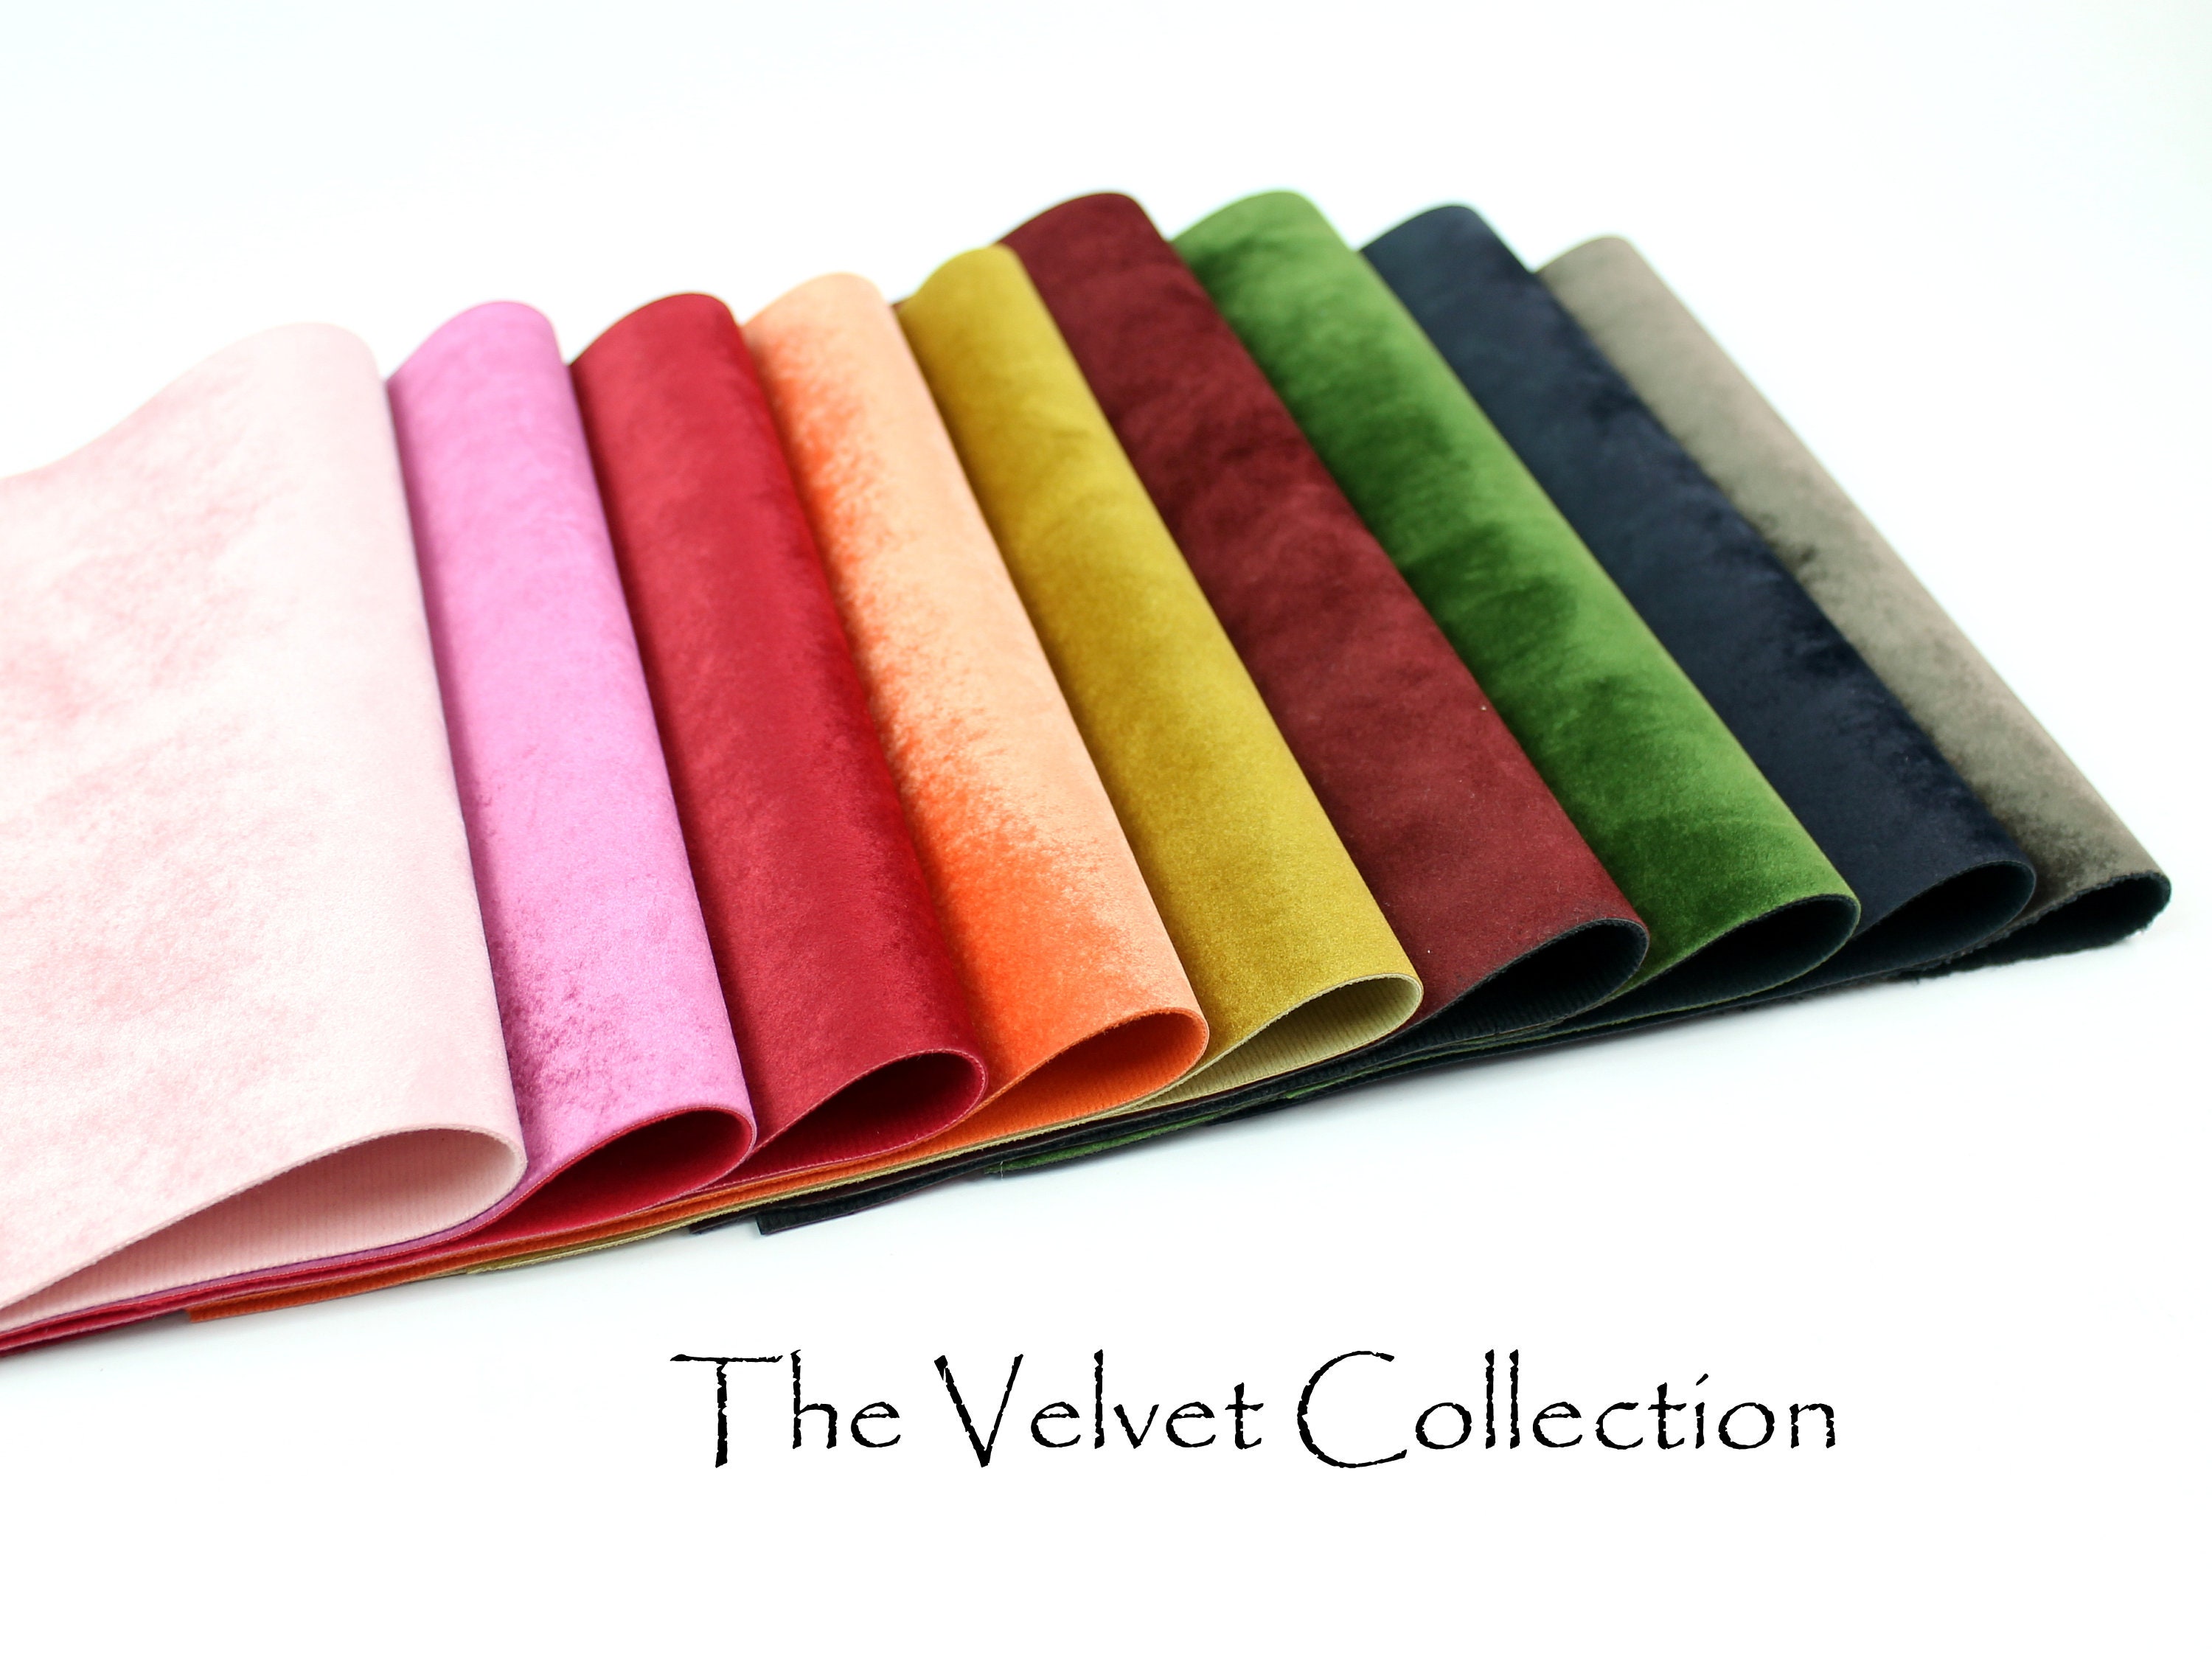 Adhesive Backed Felt Sheet for Crafts, Drawer Liner; 20 Pcs Velvet Fabric Strip with Sticky Backing by Mandala Crafts (11.5 x 8 Inches, Black)